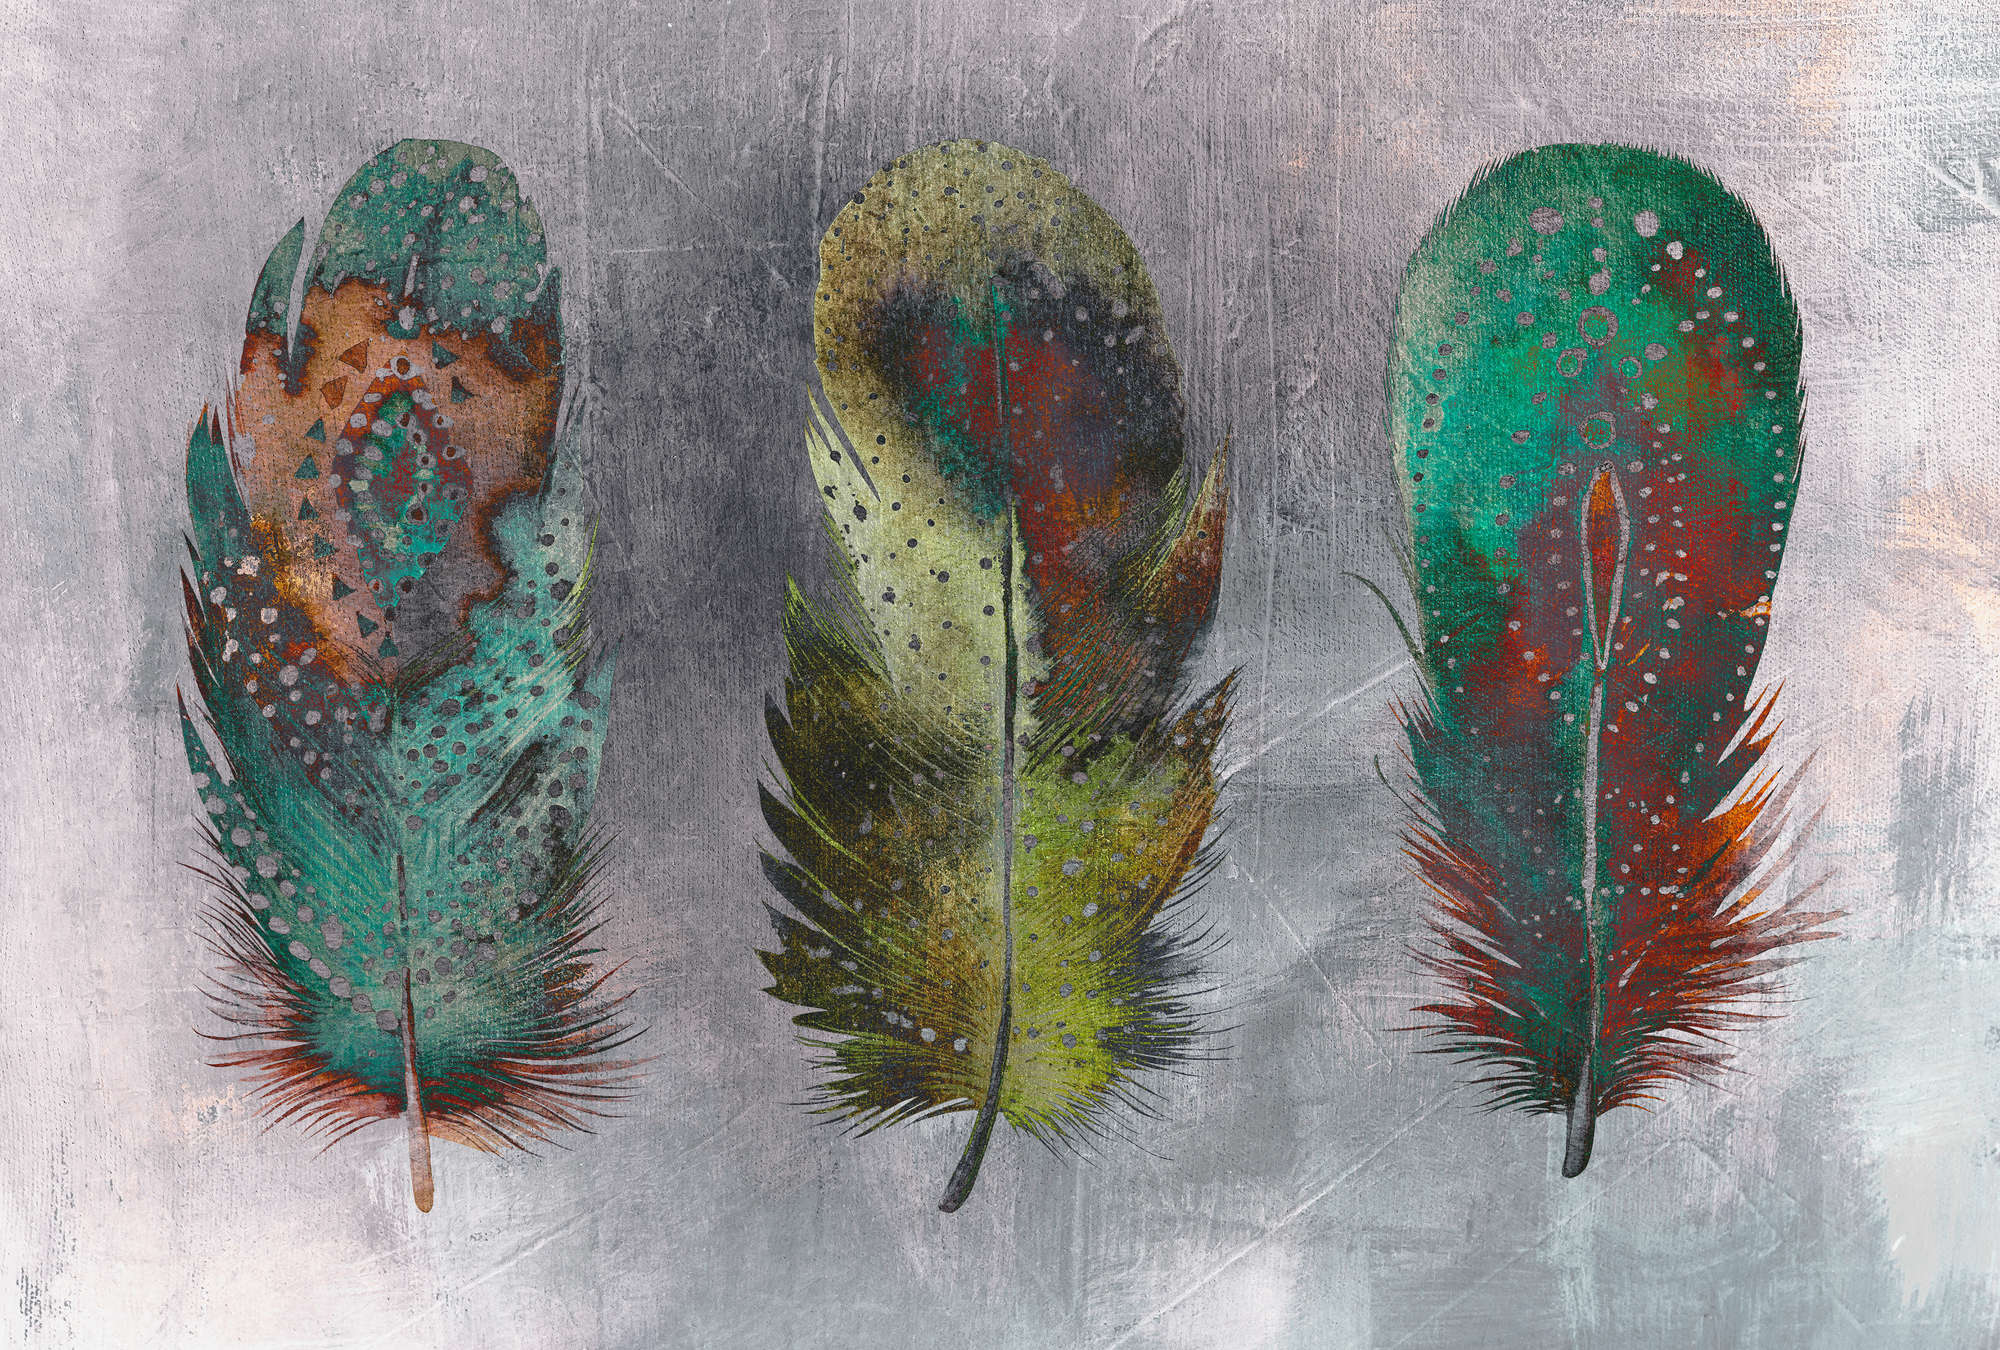             Photo wallpaper with feathers, boho & watercolour style - colourful, grey, green
        